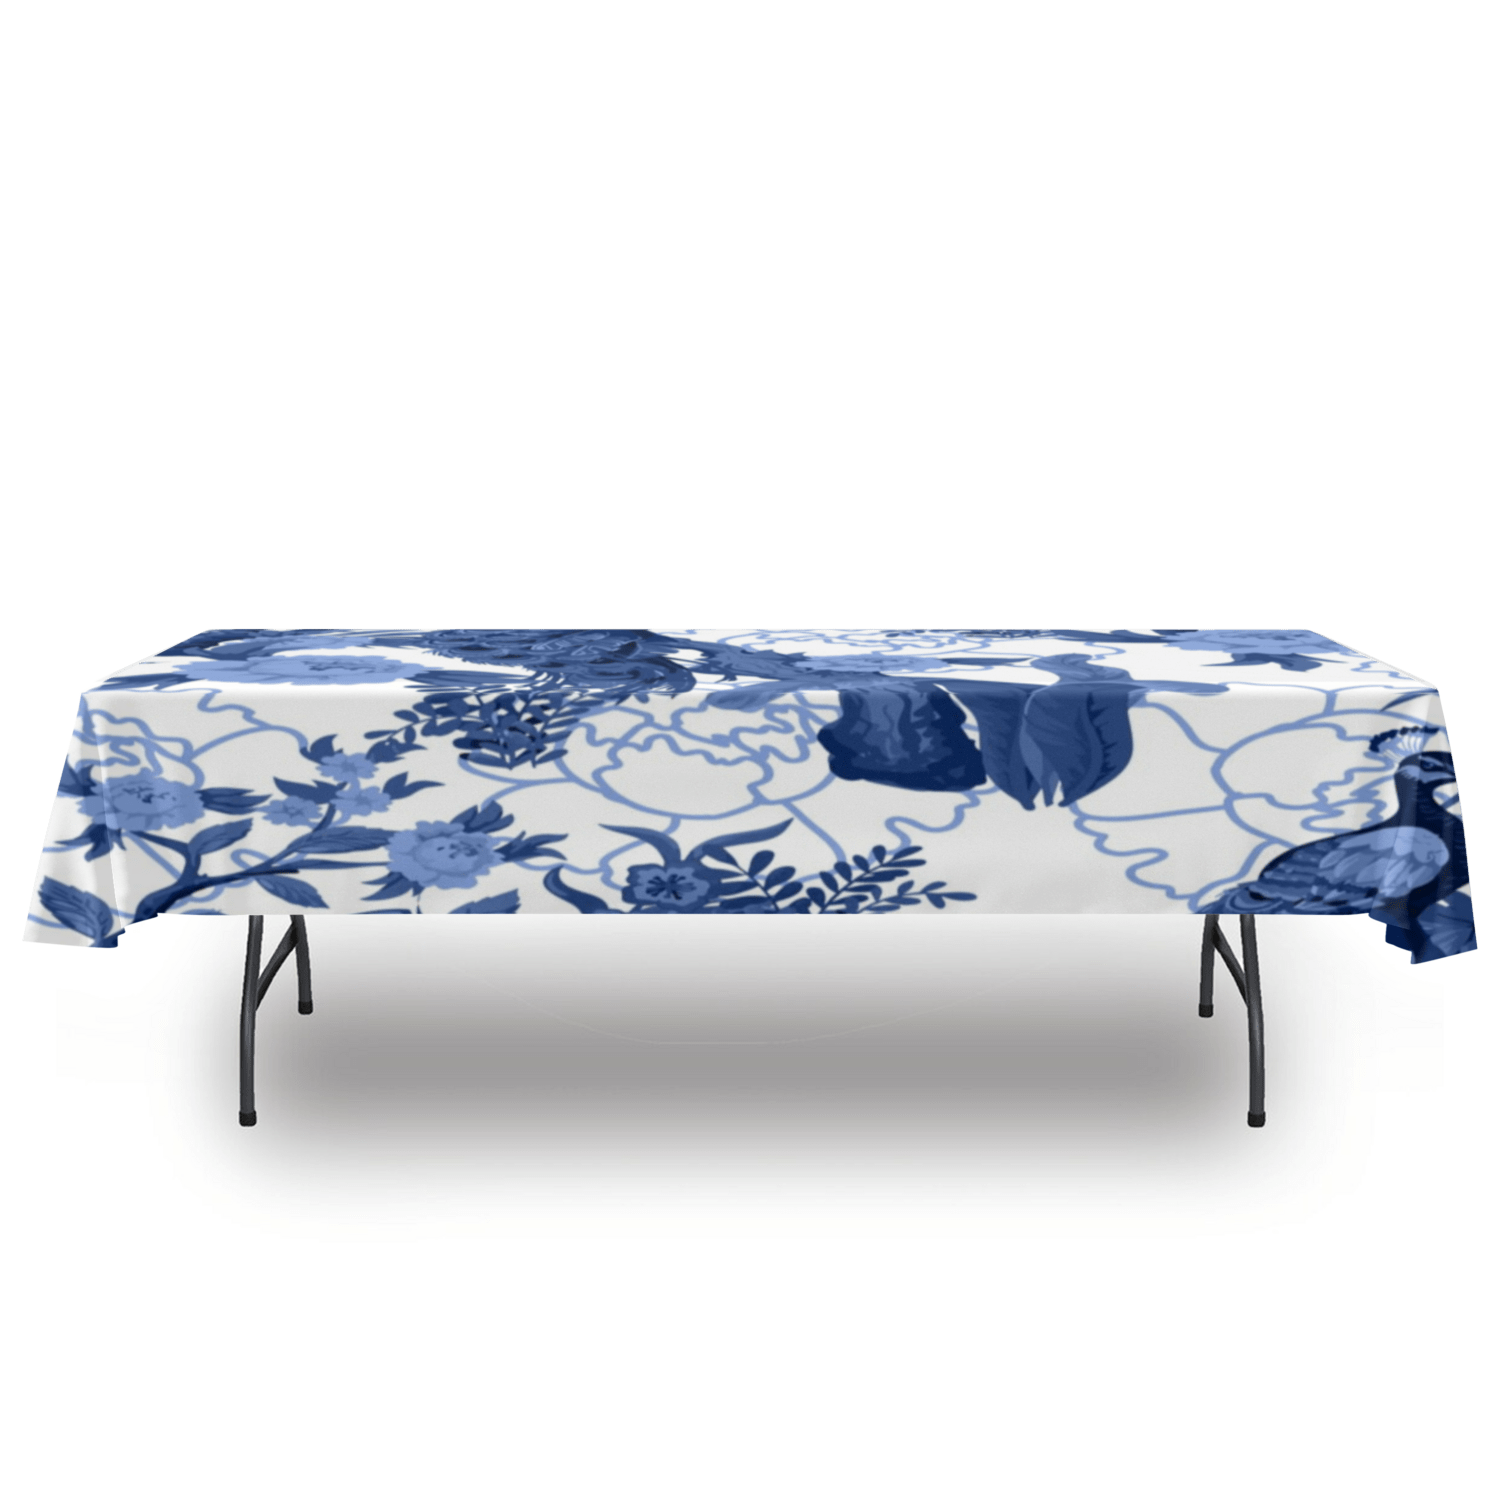 kate-mcenroe-nyc Chinoiserie Blue Peacock Tablecloth, Elegant Floral Bird Design, Classic Table Linen Tablecloths 54" x 120" 100226